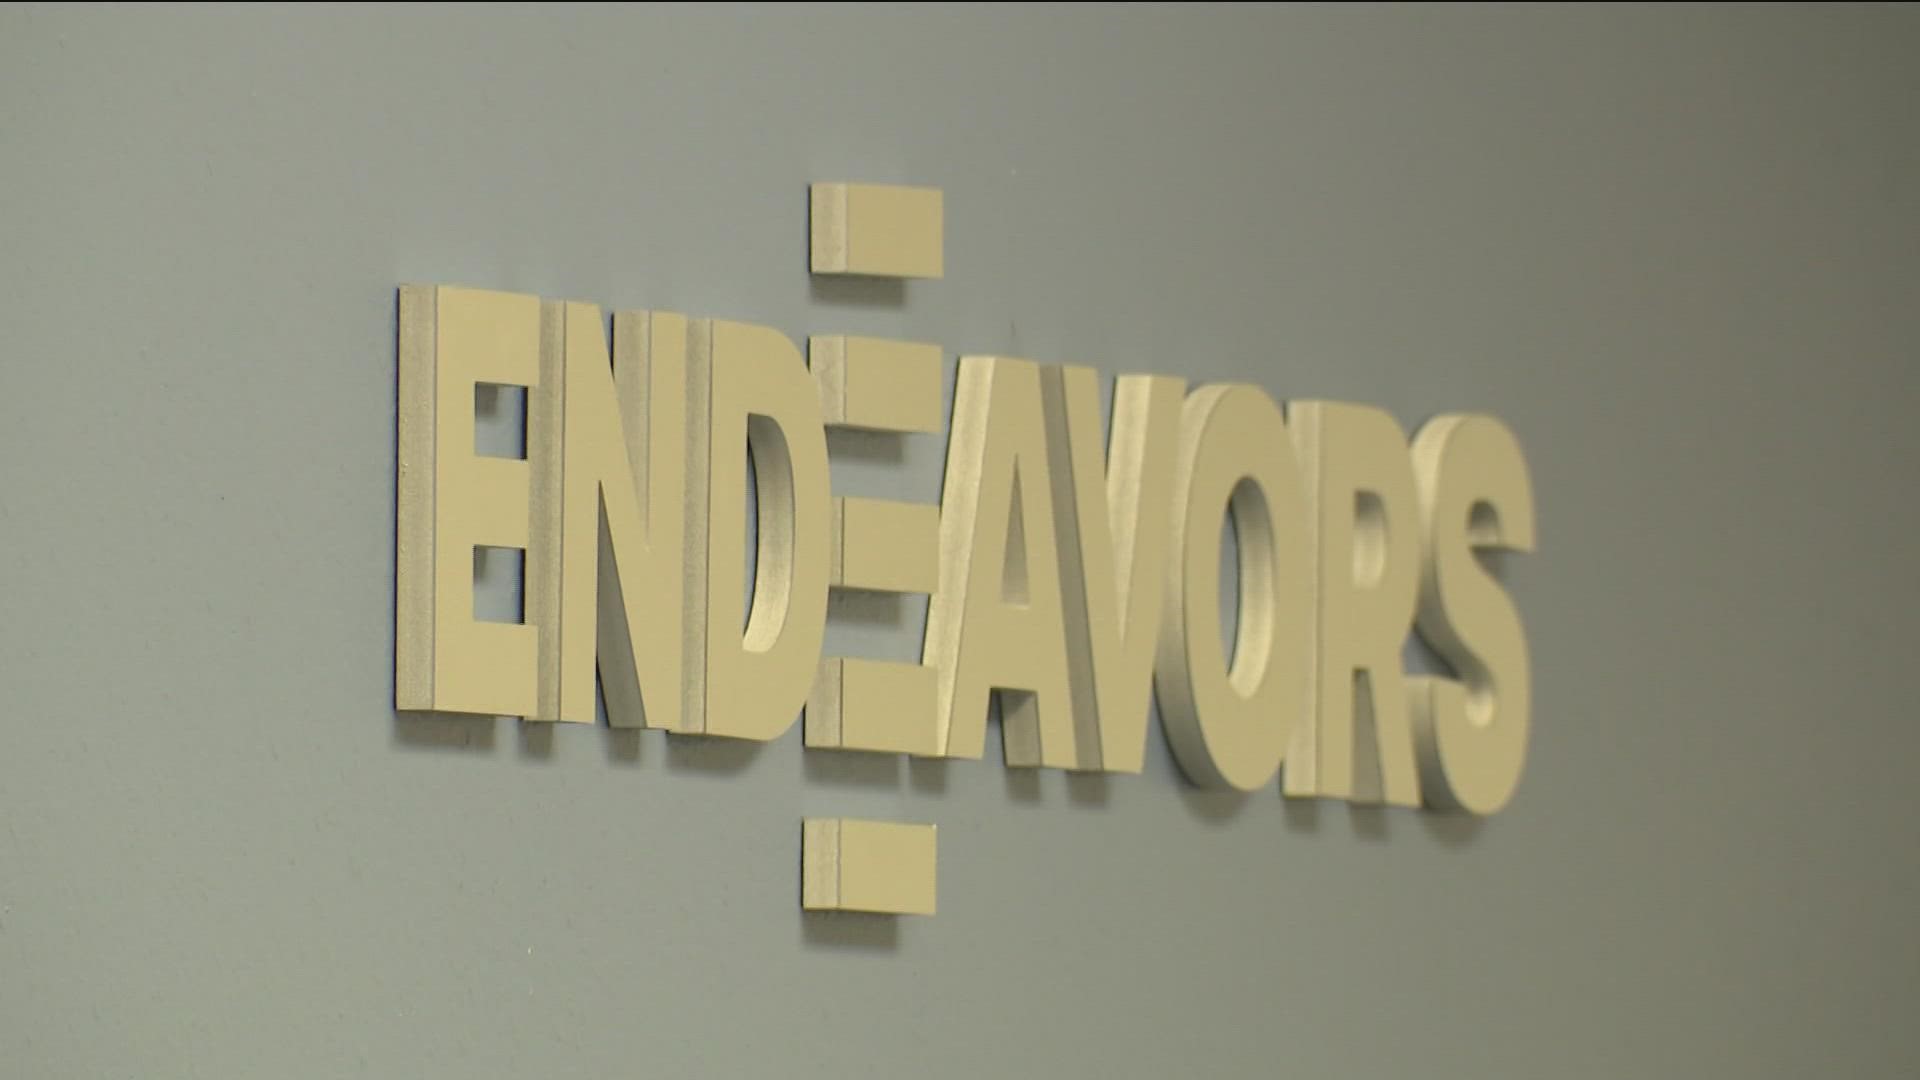 Endeavors, a San Antonio-based nonprofit, is teaming up with ECHO and the City of Austin to help provide resources for those experiencing homelessness.